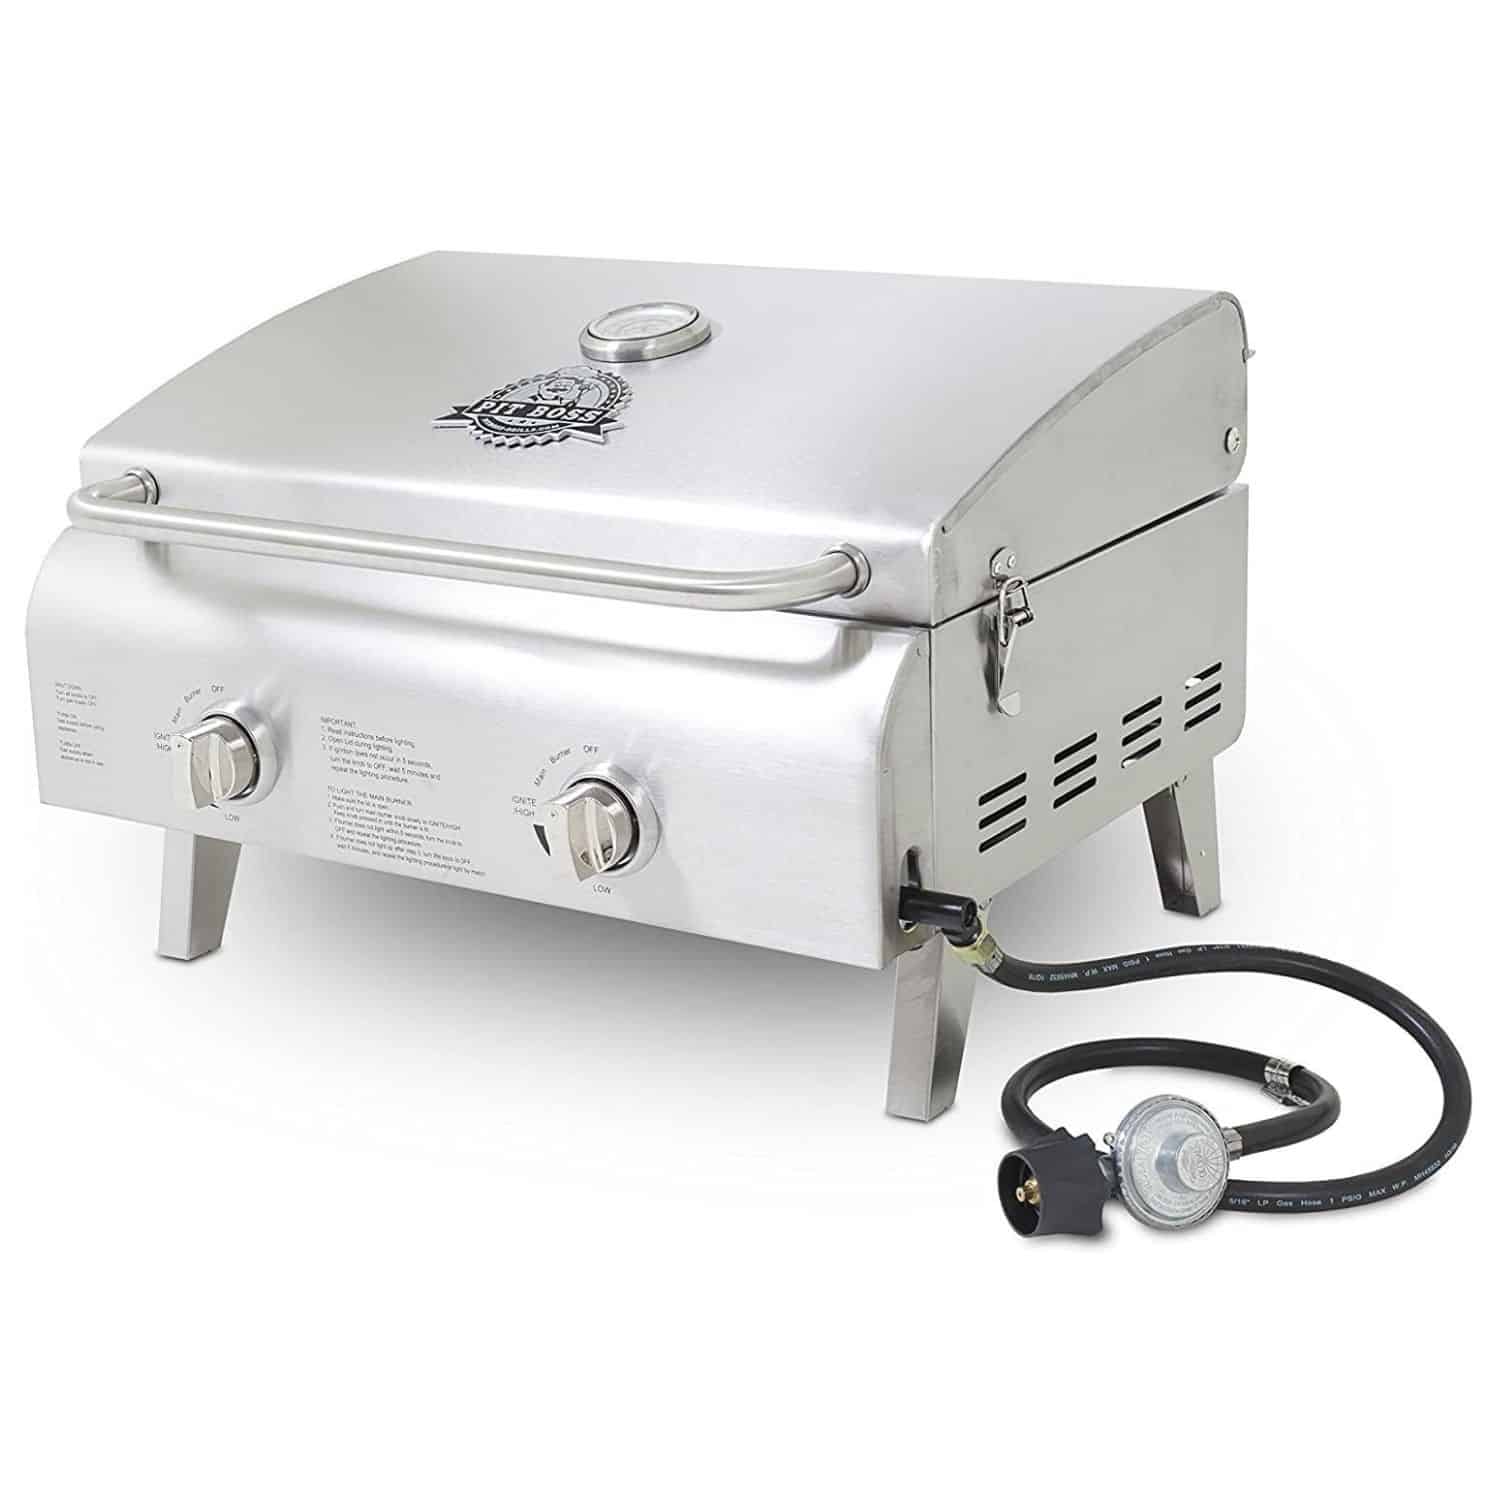 Pit Boss Grills 75275 Stainless Steel Two-Burner Portable Grill